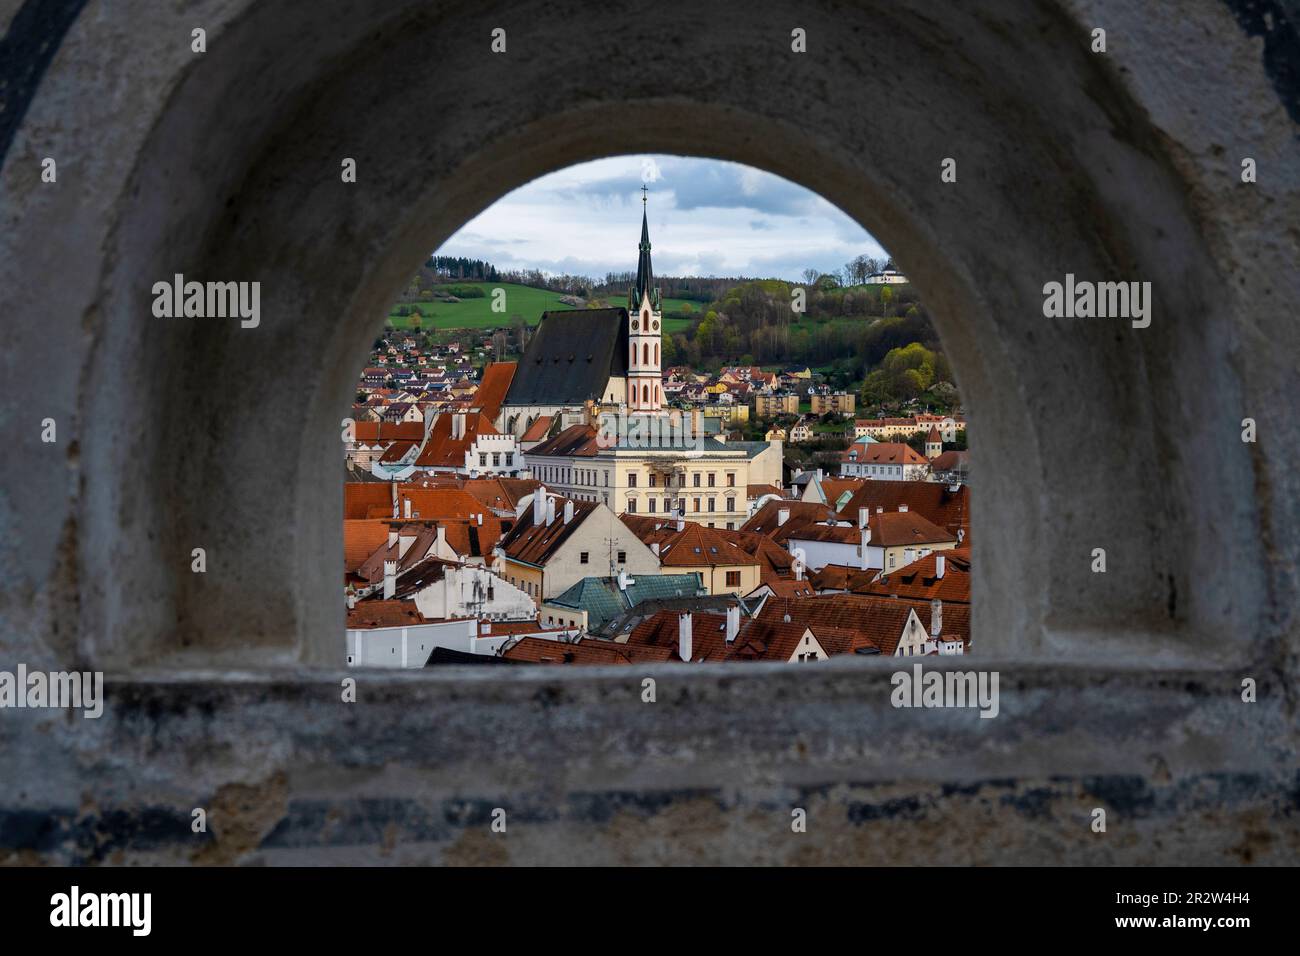 Historical buildings and church of St. Vitus, view from window in castle wall, Cesky Krumlov. Stock Photo